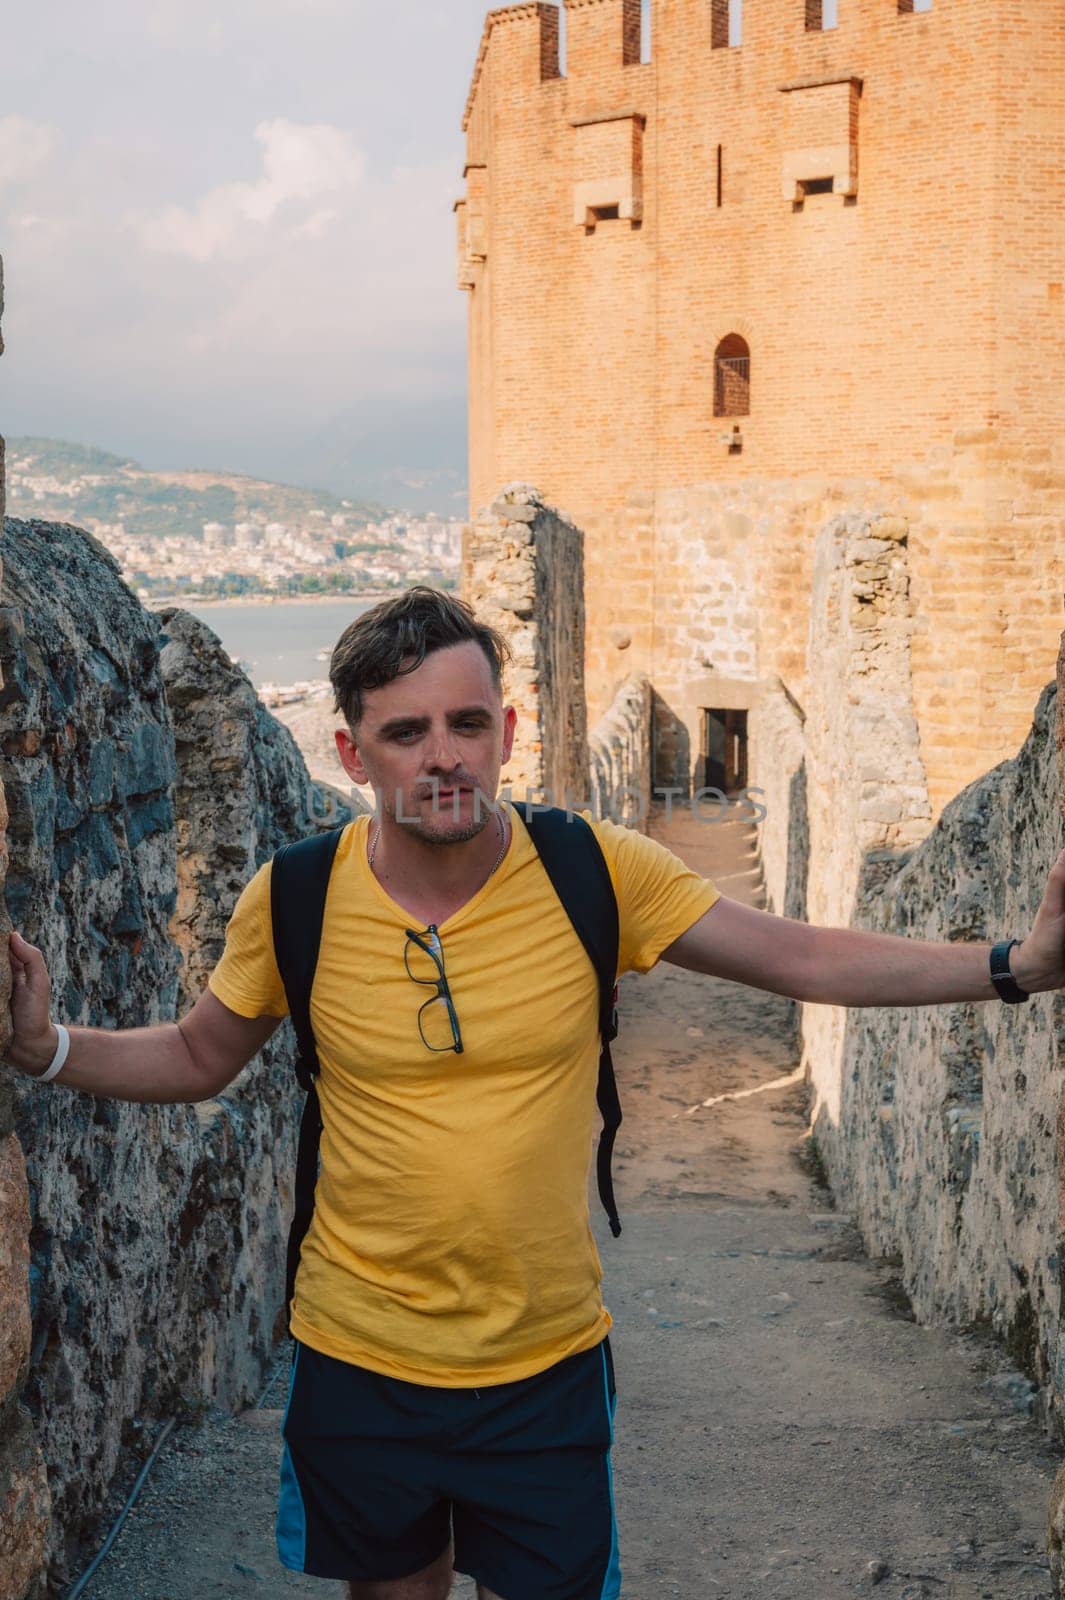 Man at fortress ruins of the historical Red Tower - Kizil Kule, in Alanya Castle, the famous touristic place.